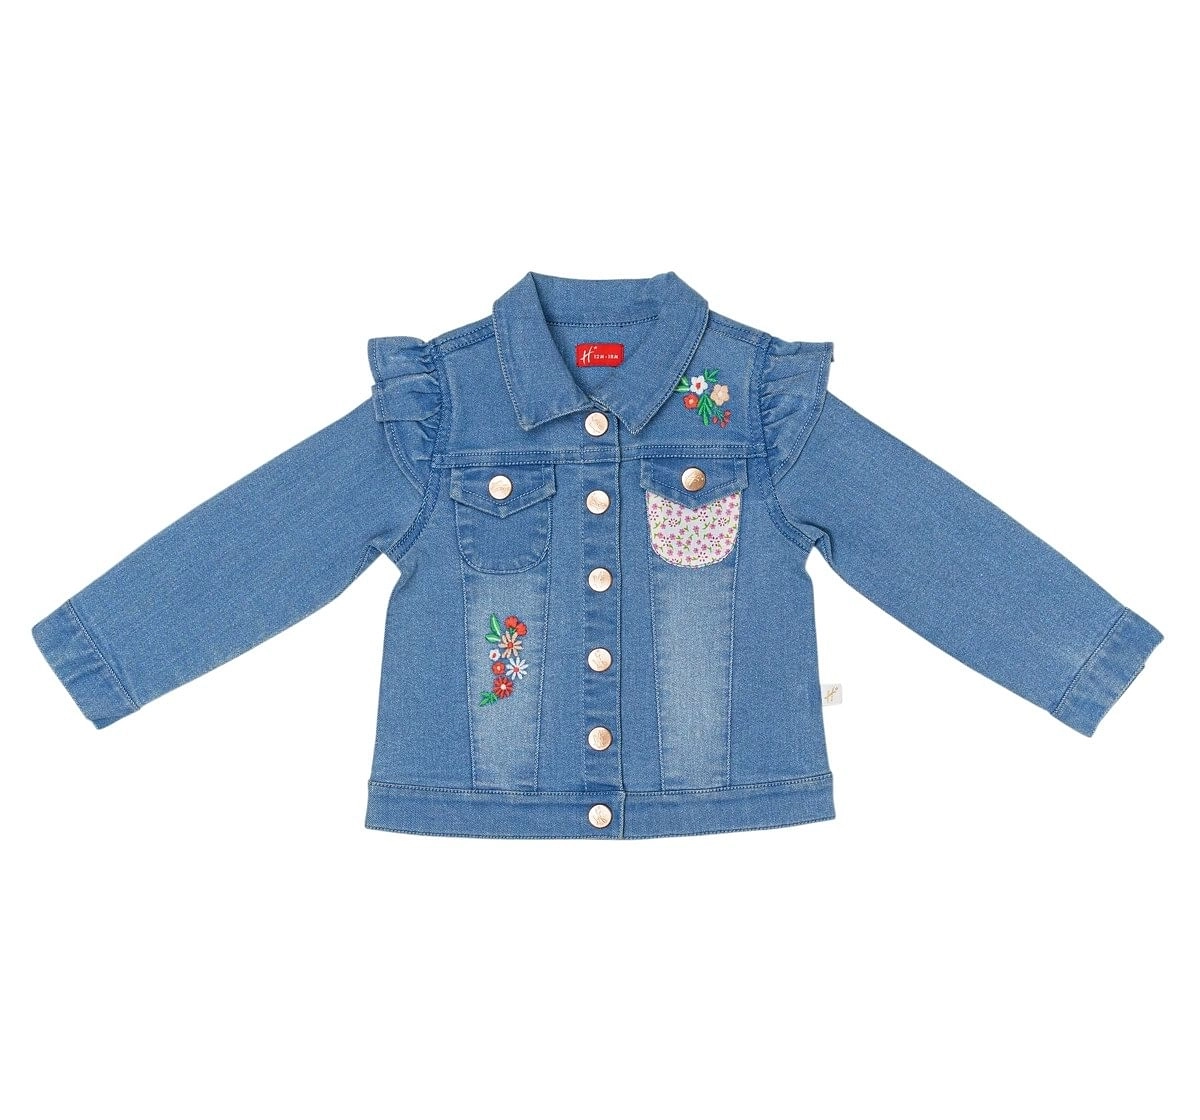 Stylish Jeans Jacket and Jeans Pant set for girls